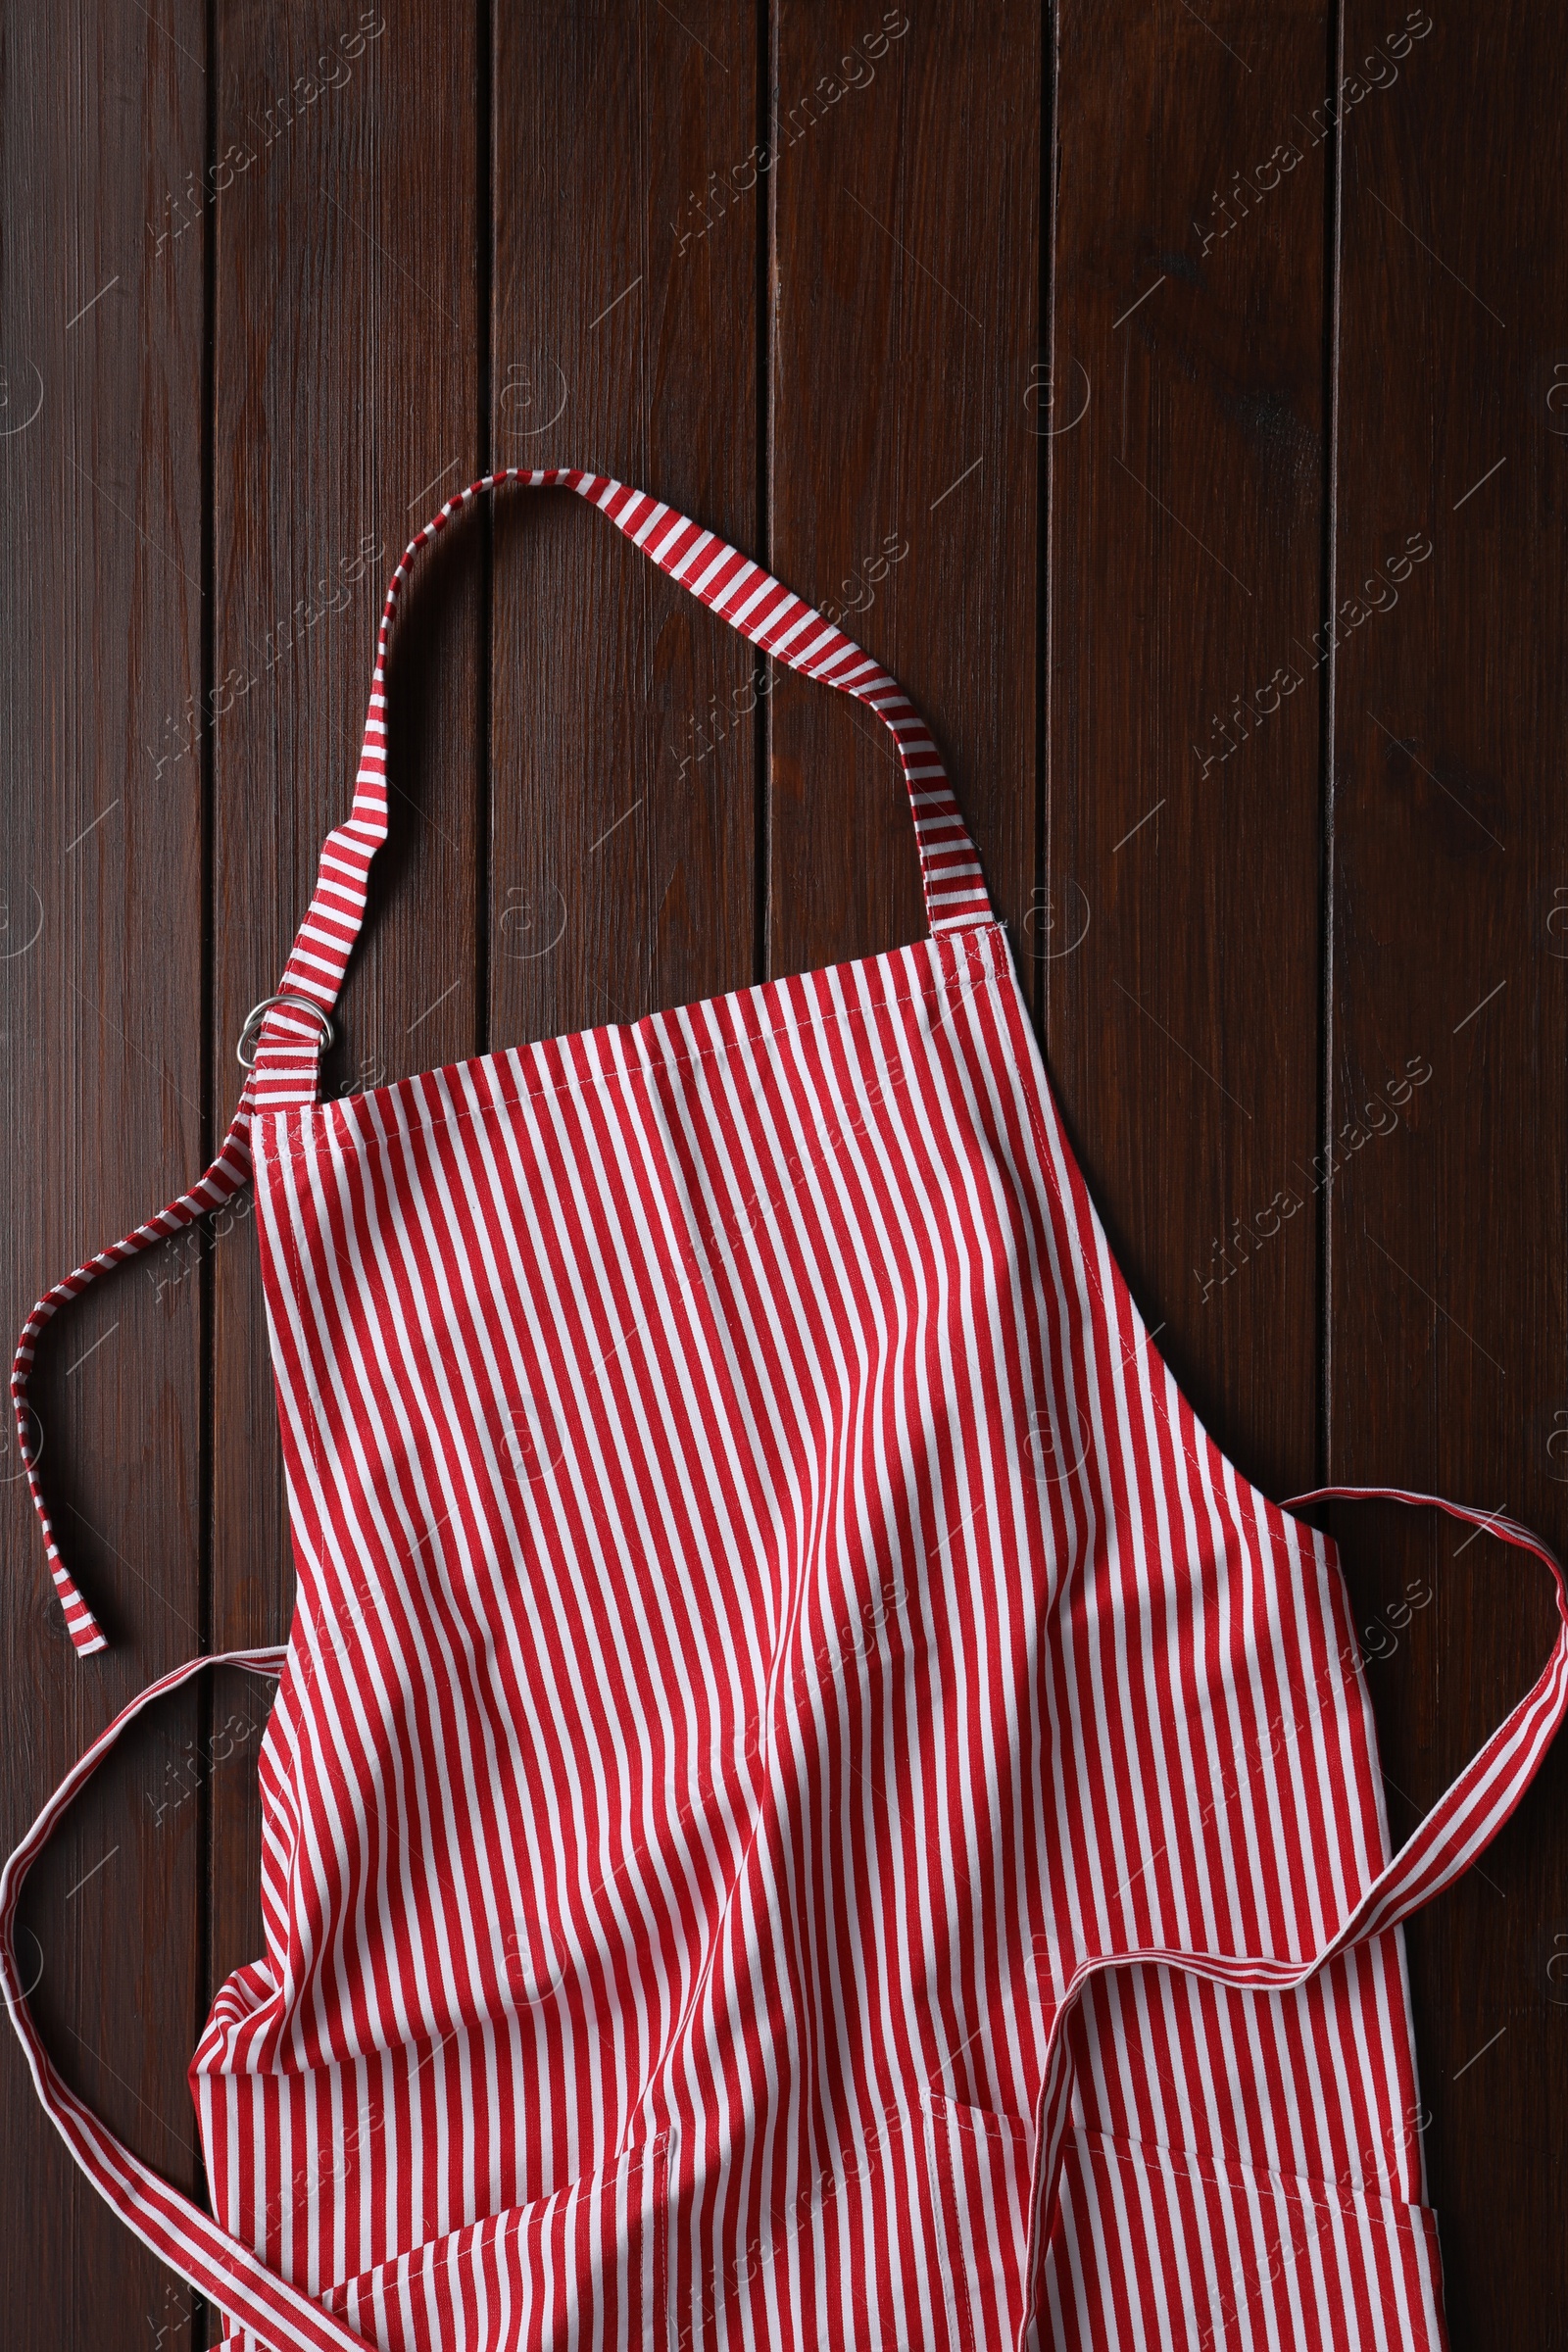 Photo of Striped apron on wooden table, top view